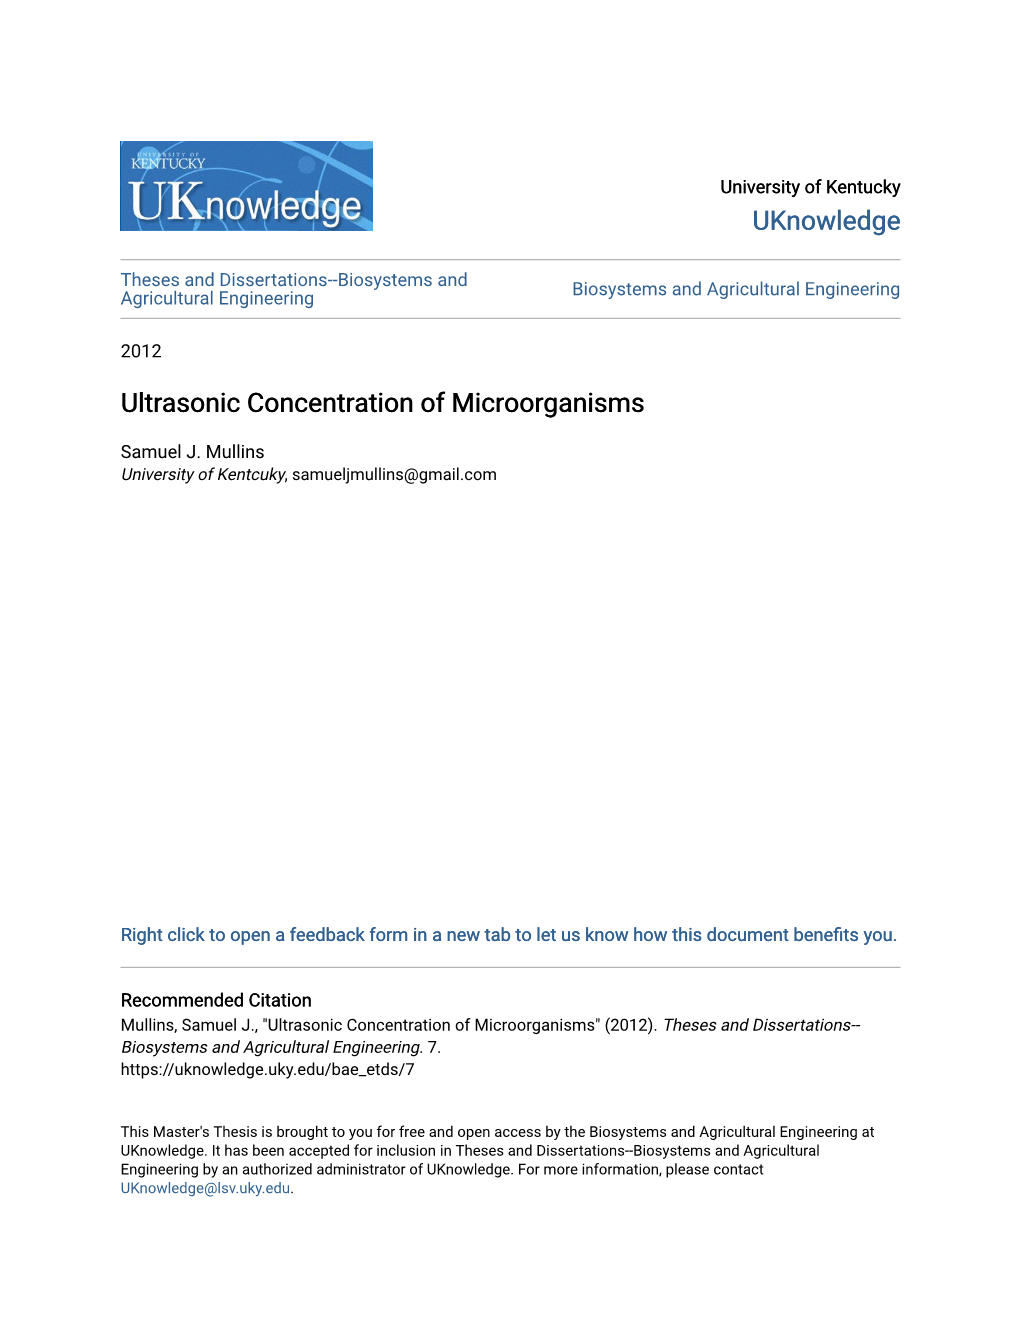 Ultrasonic Concentration of Microorganisms